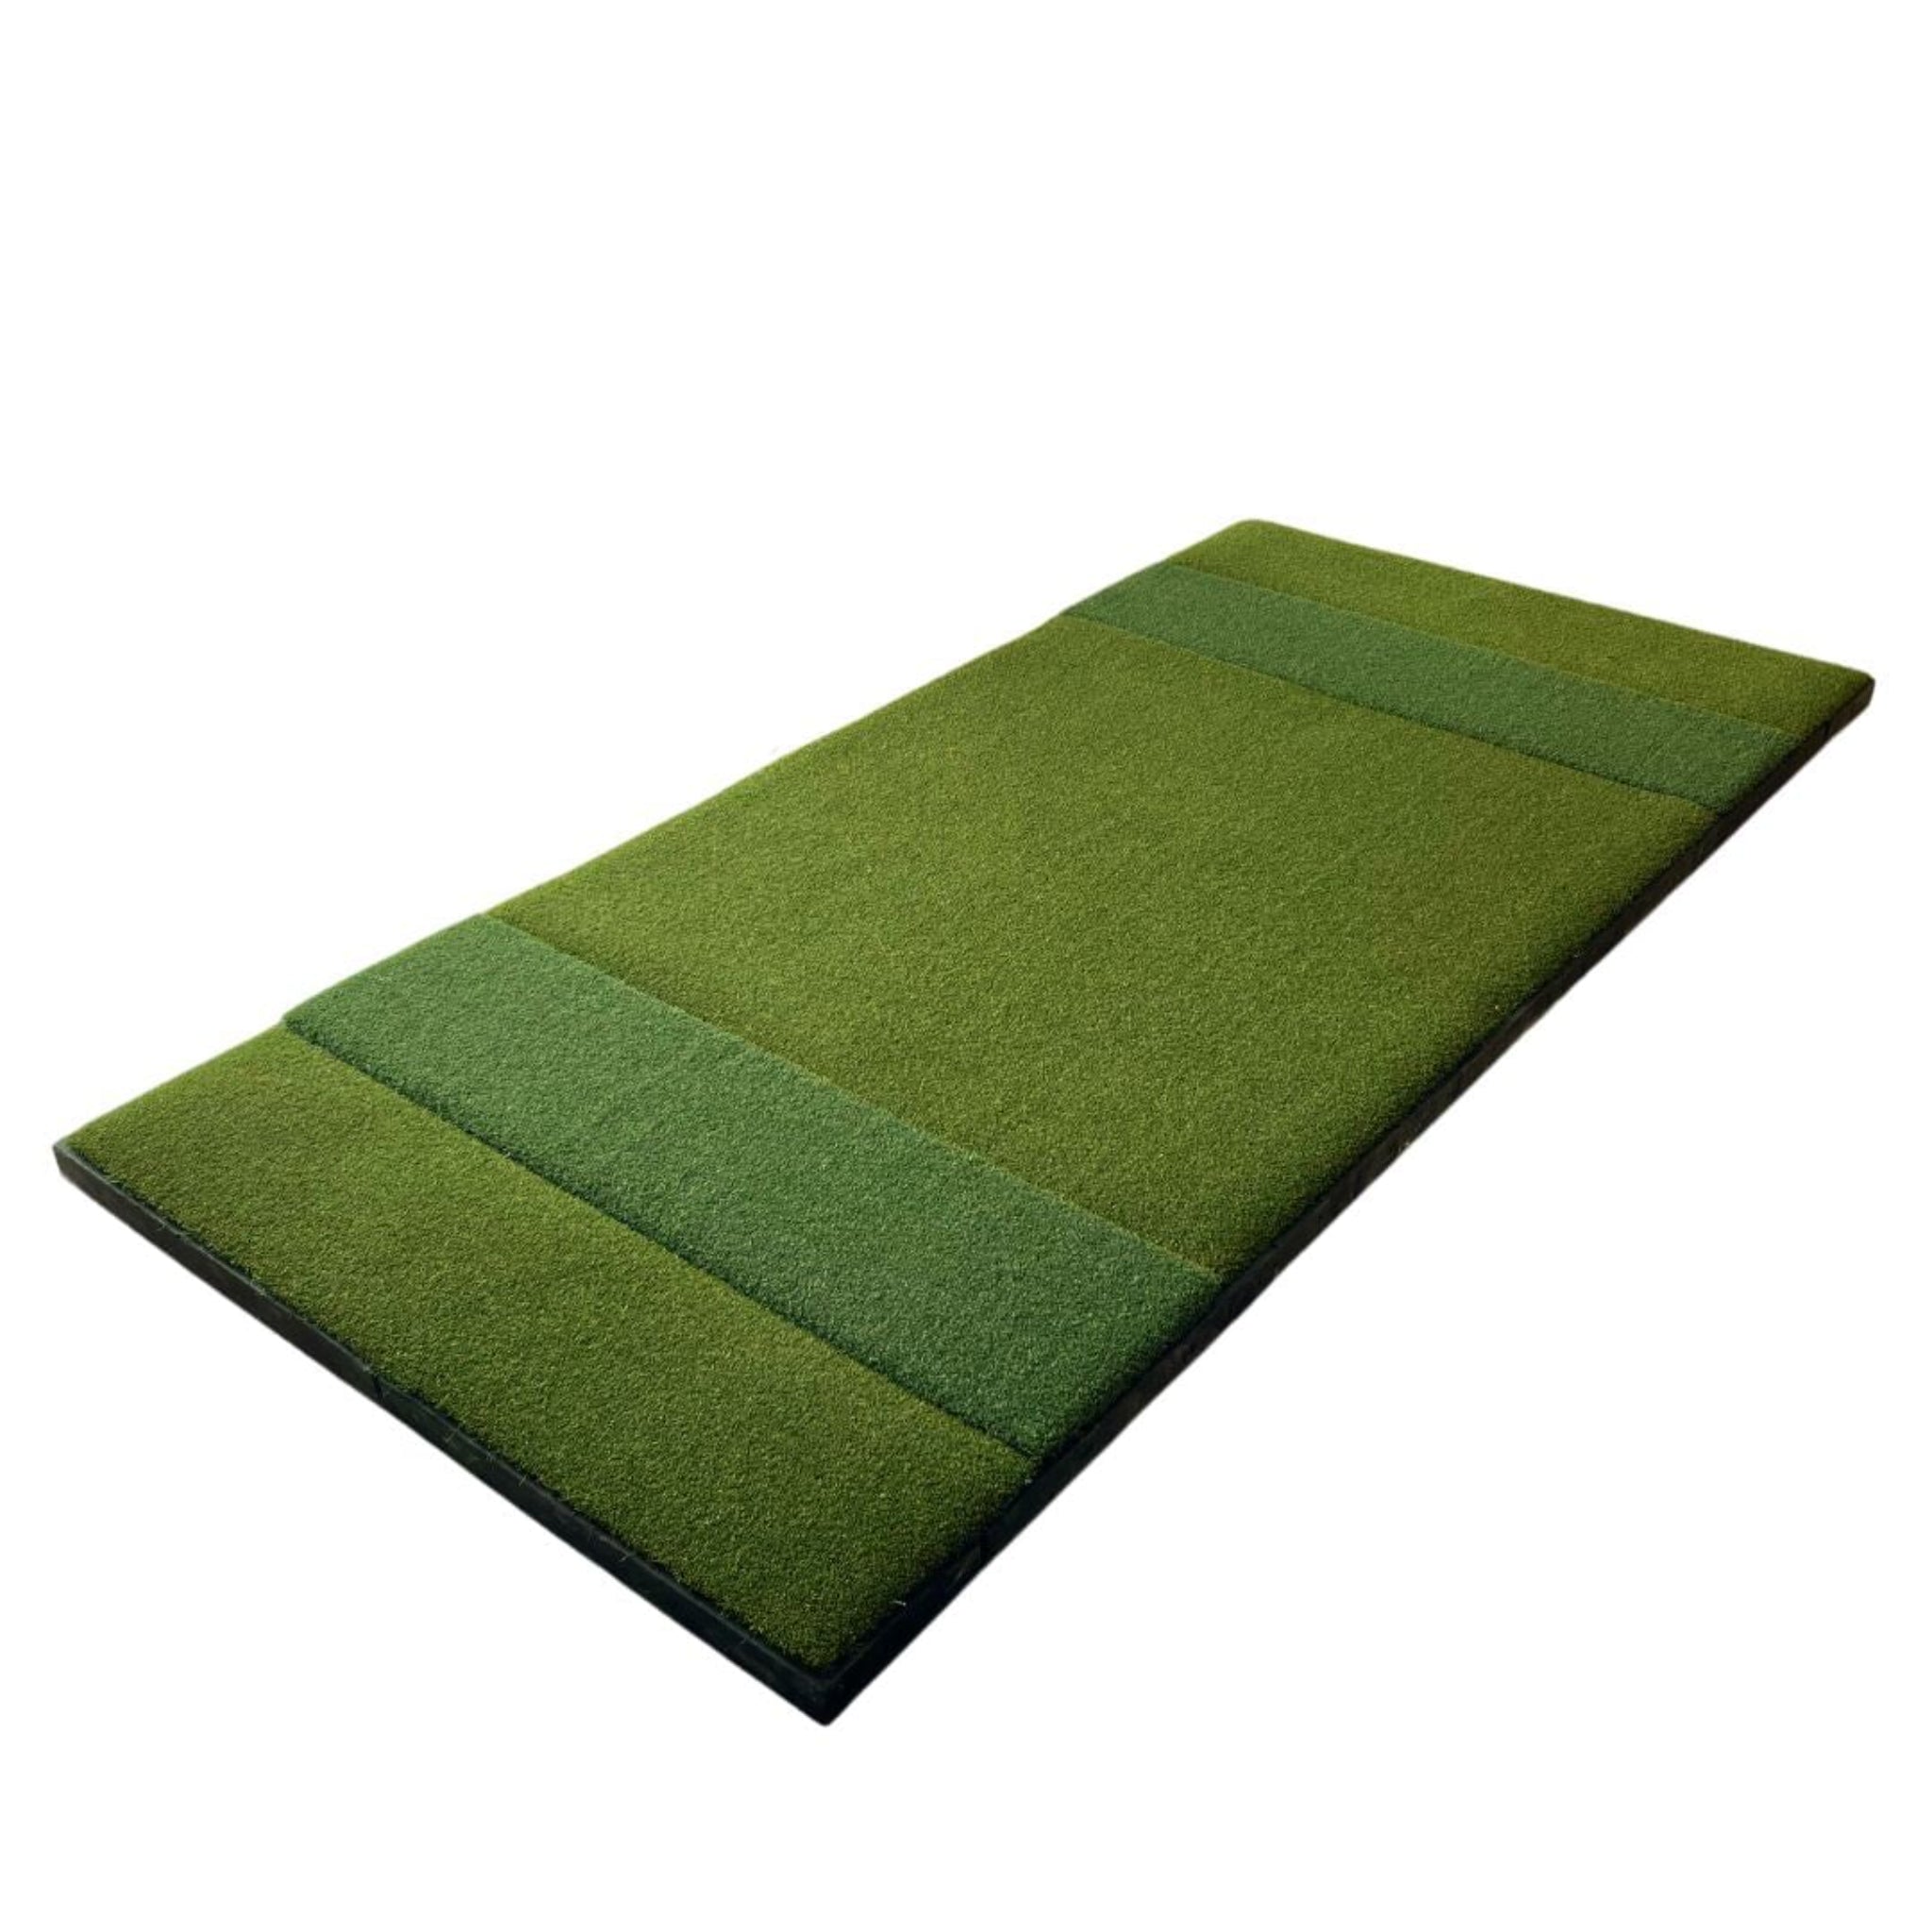 SIGPRO Super Softy 4' x 8'4" Double Sided Golf Mat